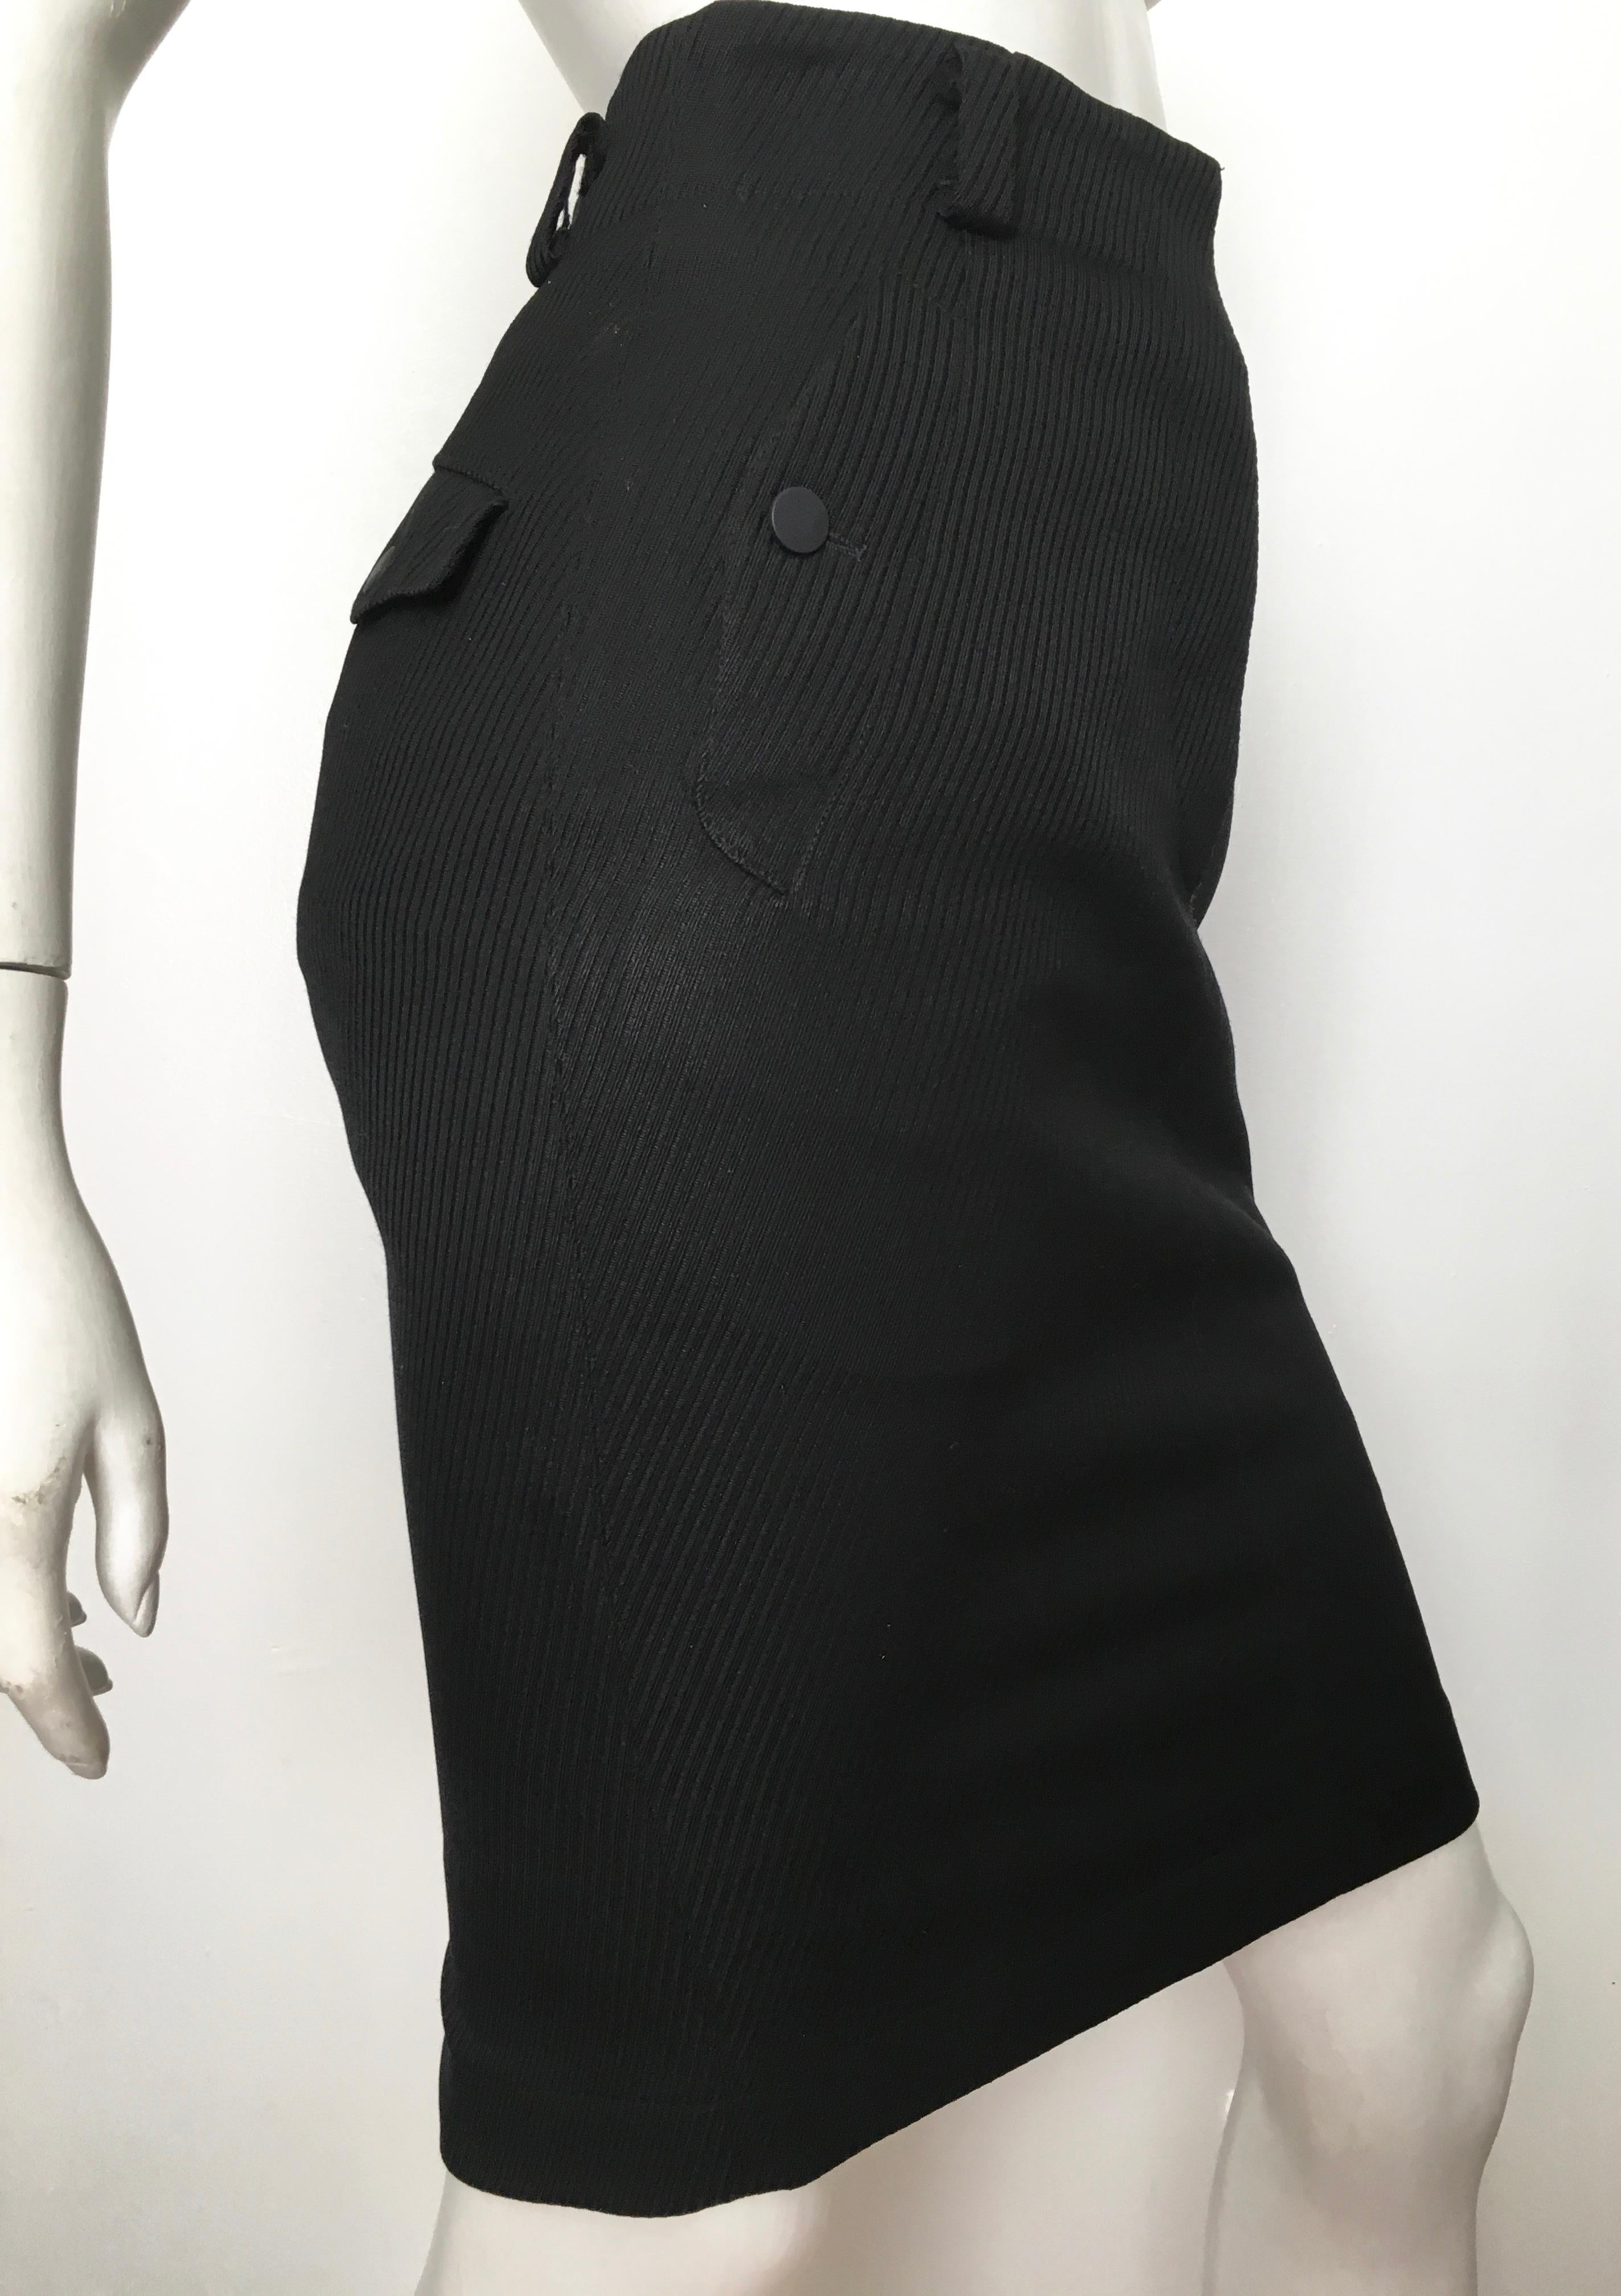 Women's or Men's Azzedine Alaia 1980s Black Pencil Skirt with Pockets Size 4.